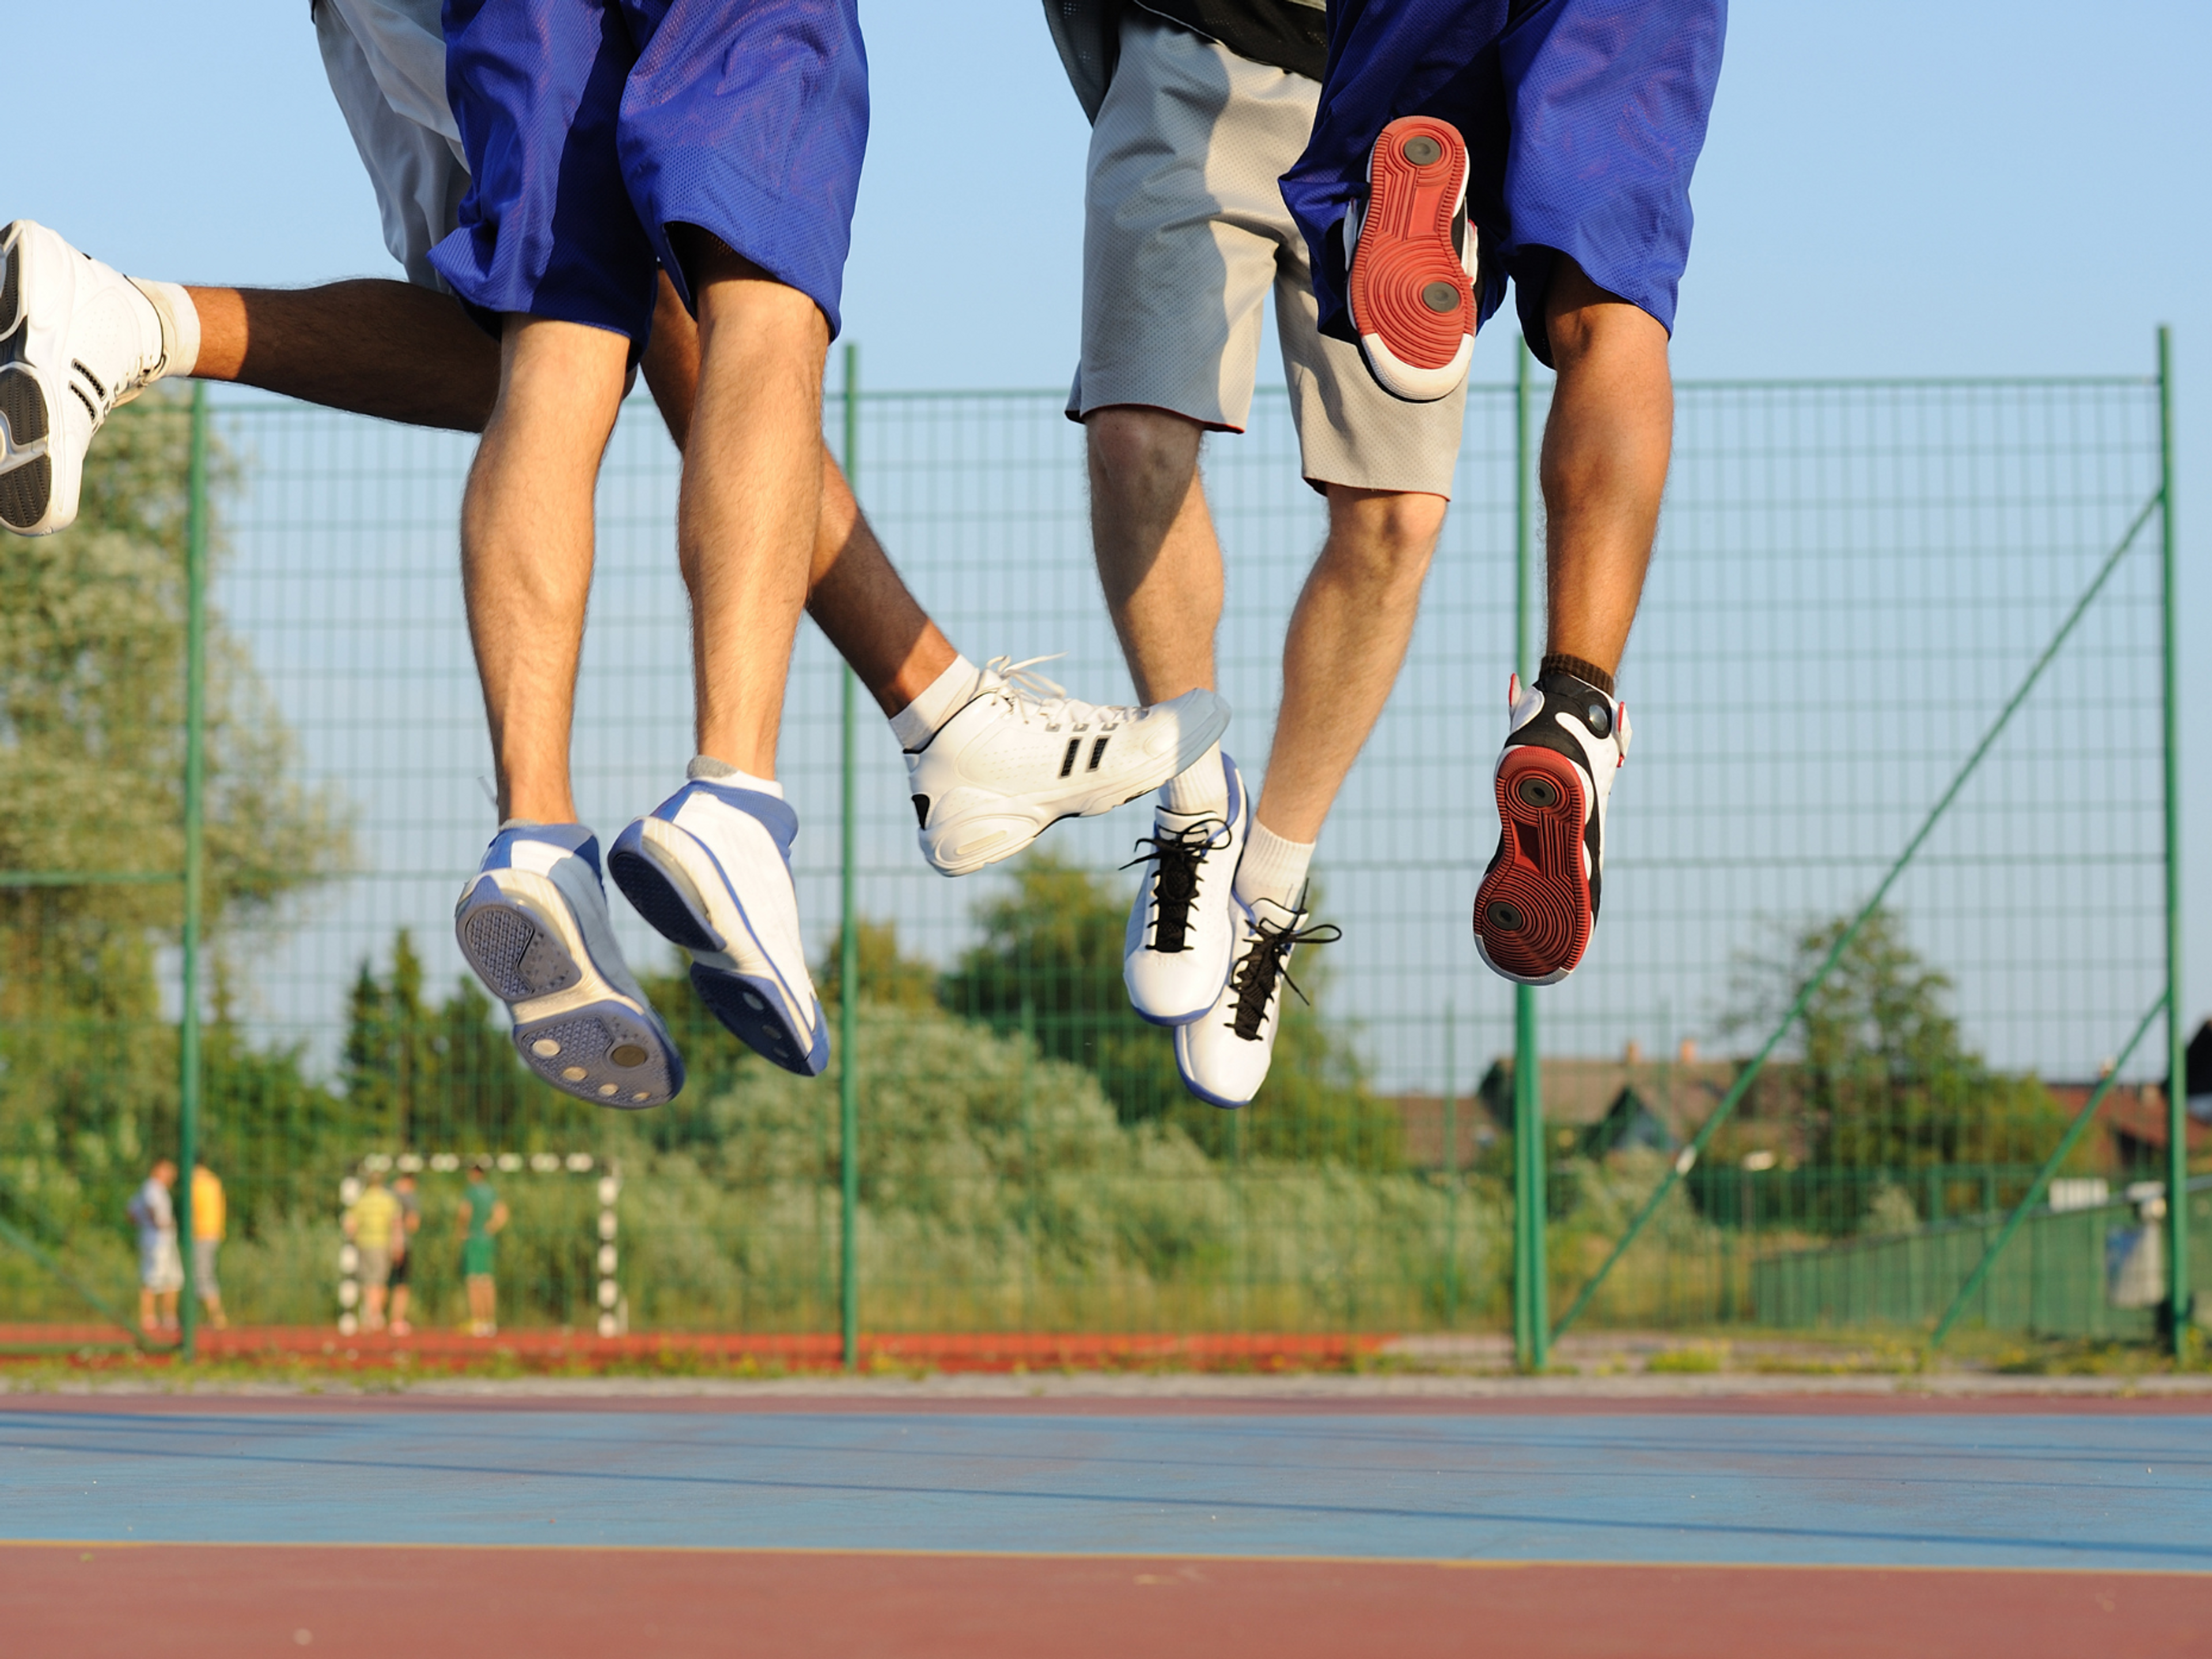 Jumping activities like playing basketball are associated with patellar tendonitis.